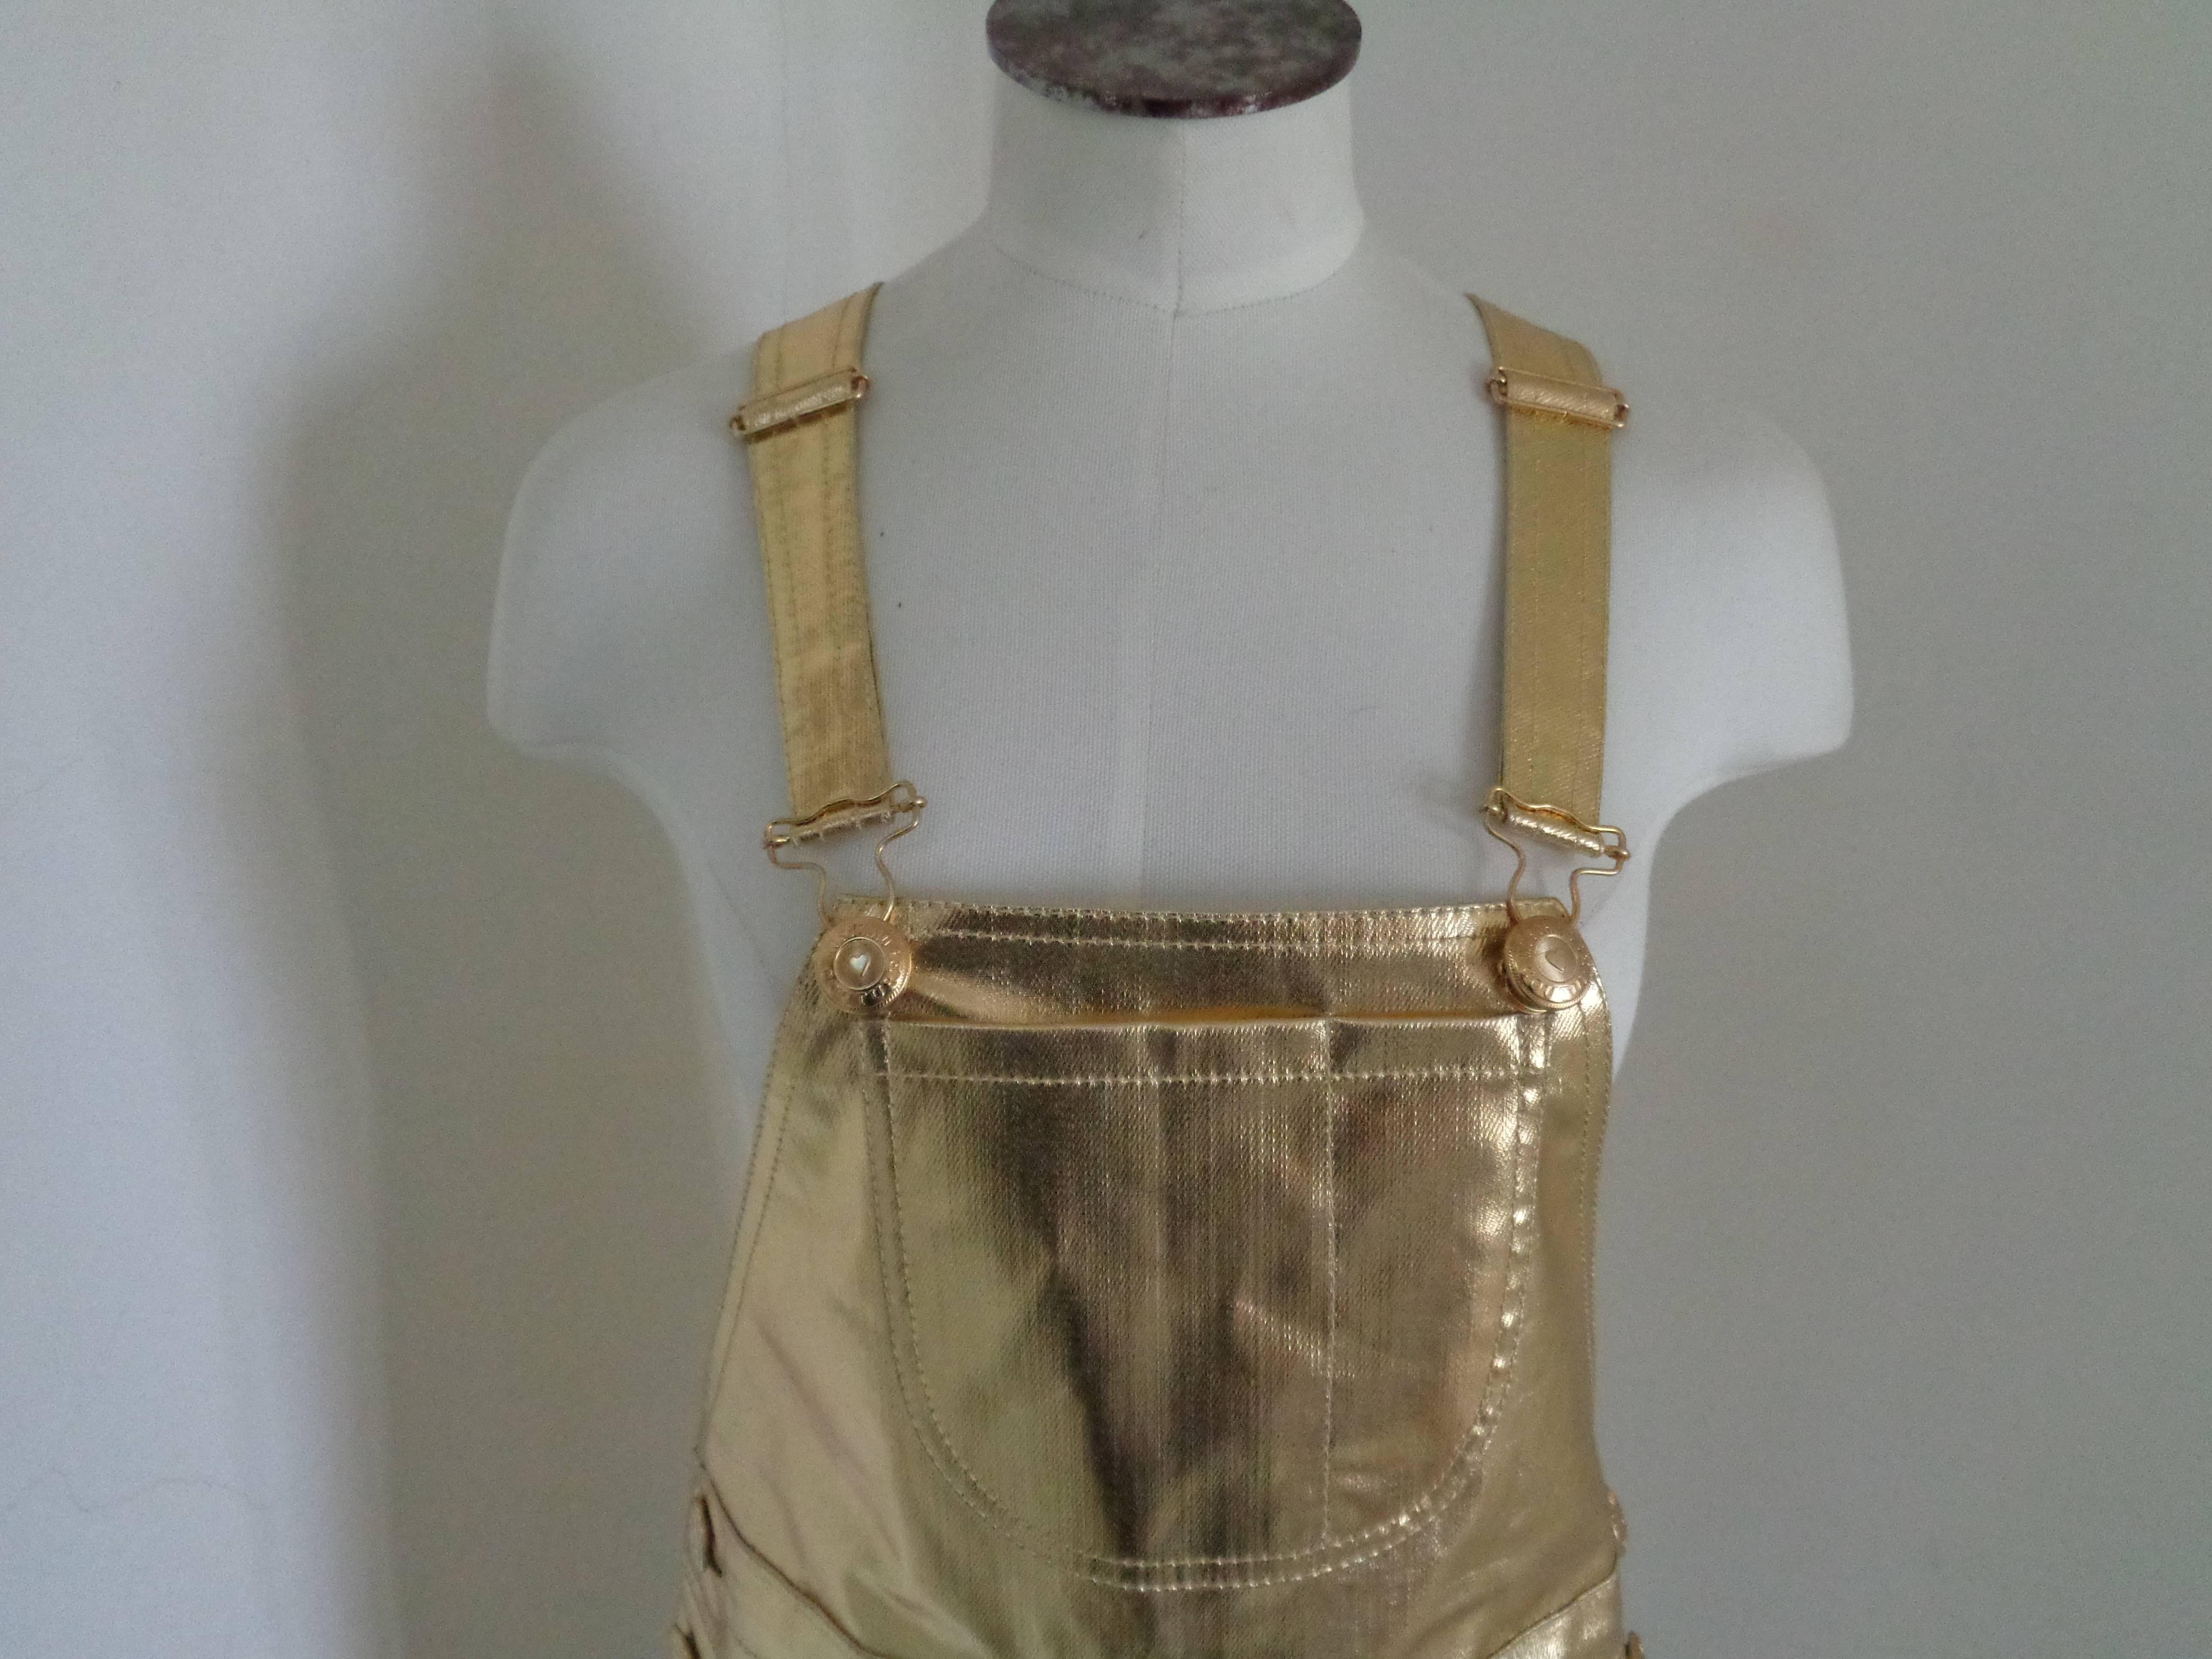 Moschino Couture Overall Gold Salopette NWOT

Composition: Cotton & Others

Two tasks 

Size 44 in italian size range